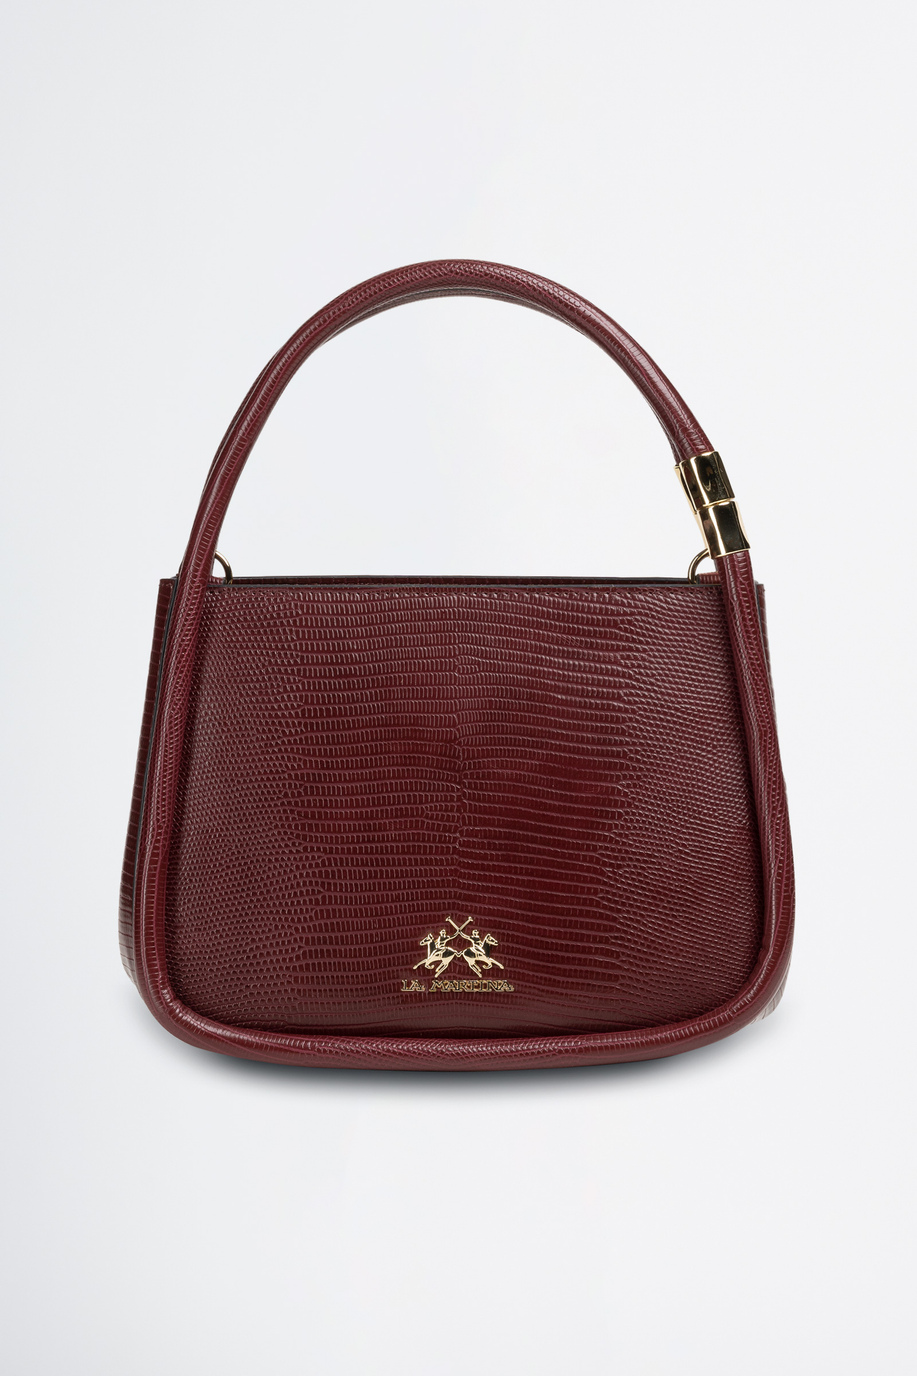 Smooth synthetic PU fabric double-handle bag - Accessories for her | La Martina - Official Online Shop